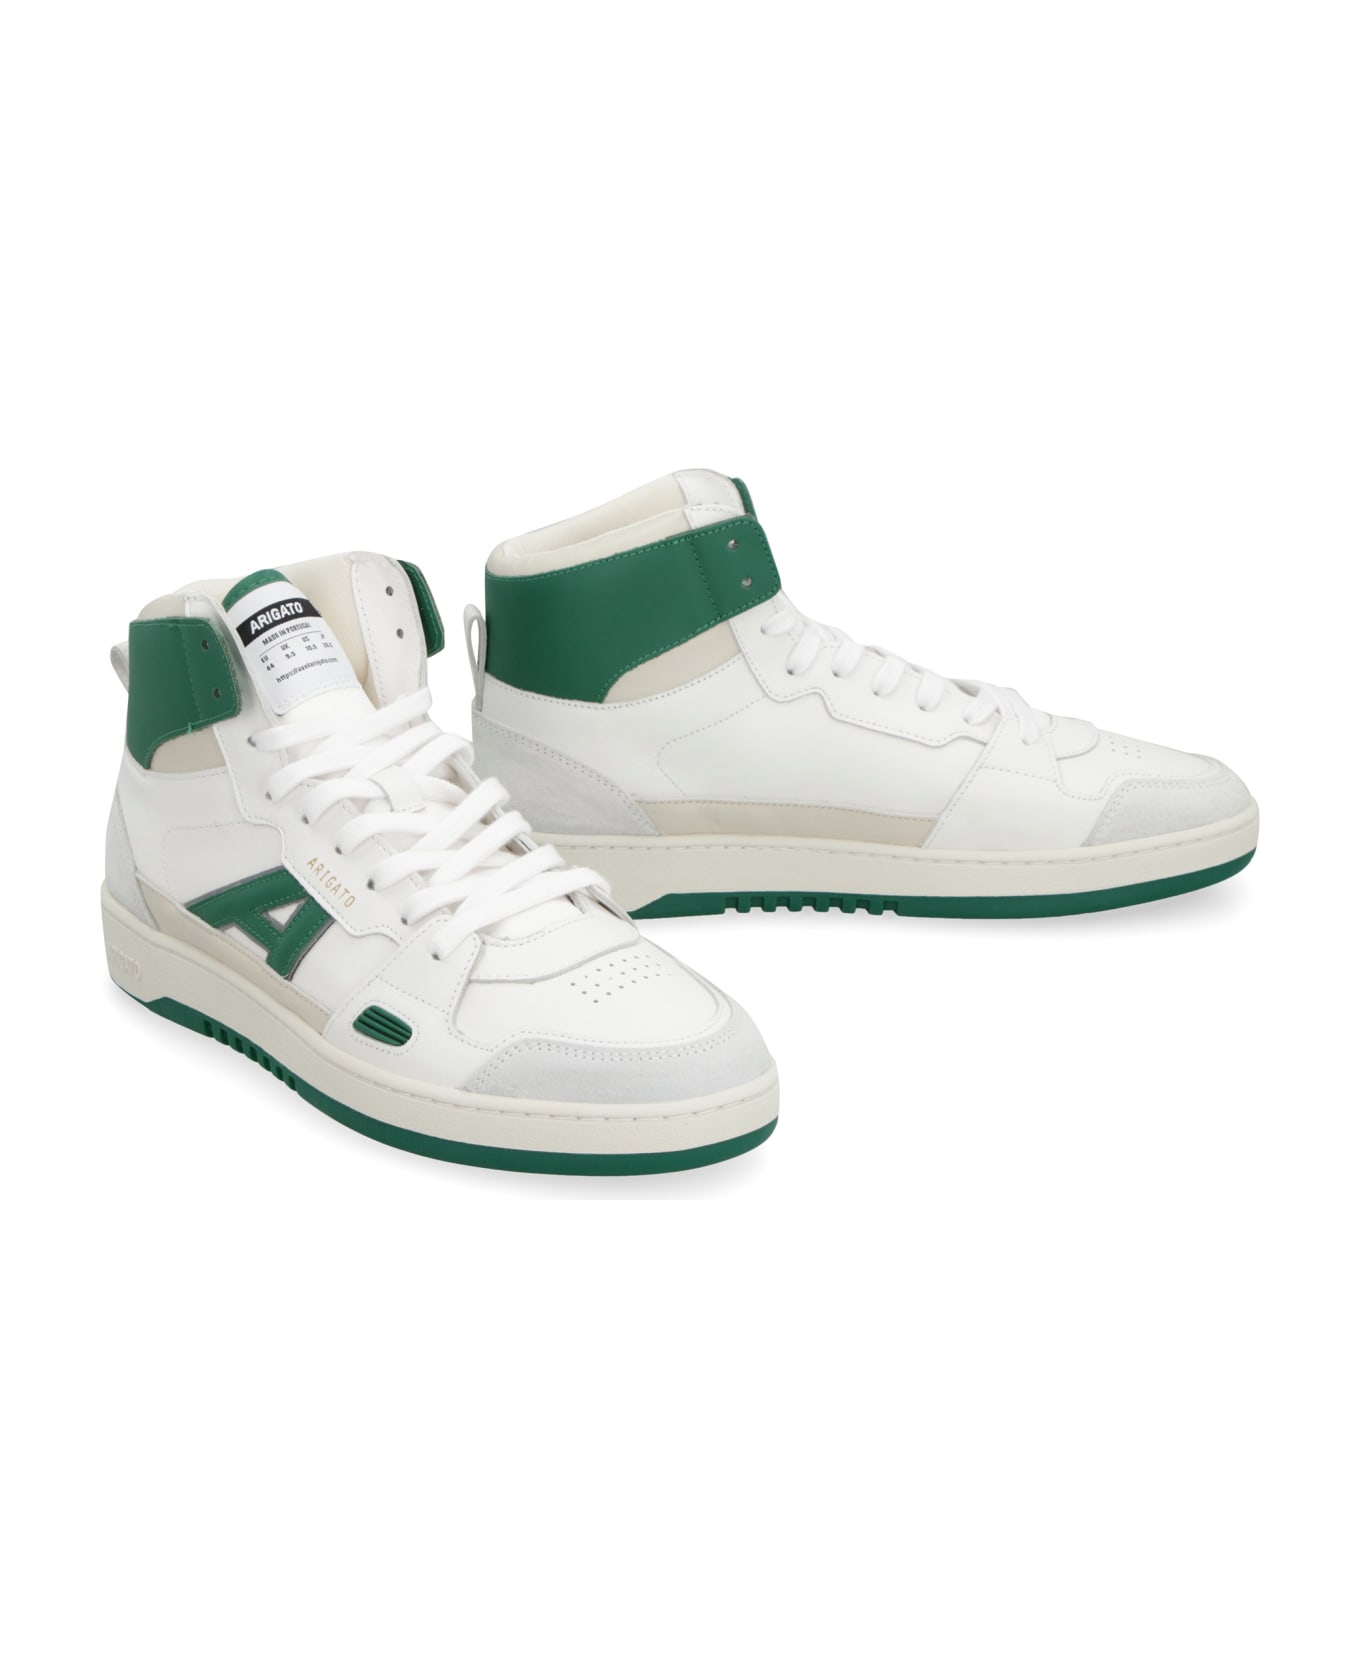 Axel Arigato A-dice Hi High-top Sneakers - White